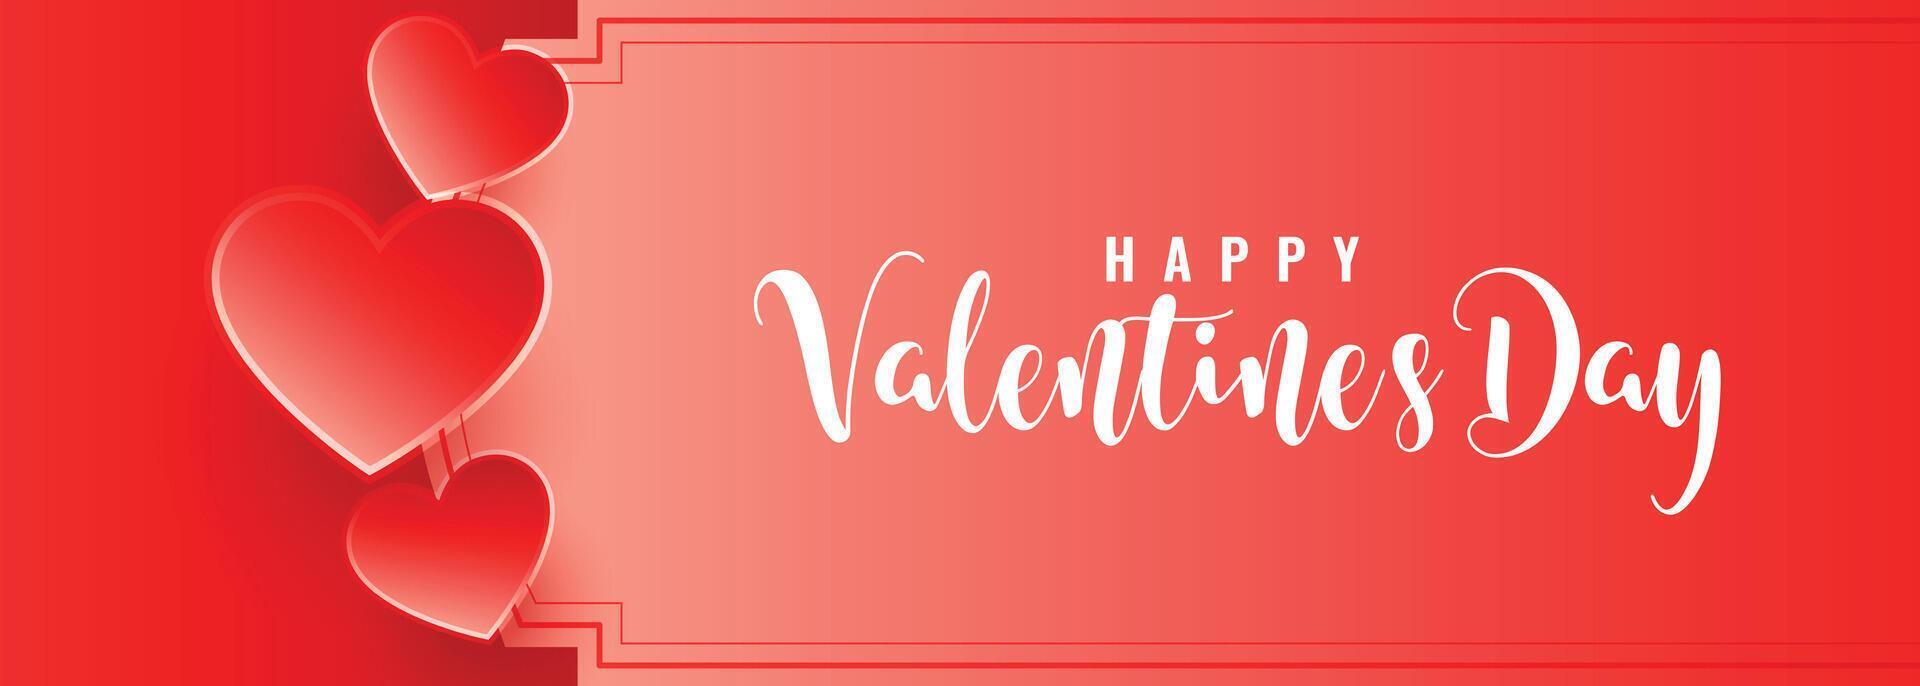 red valentines day wide banner with three hearts vector